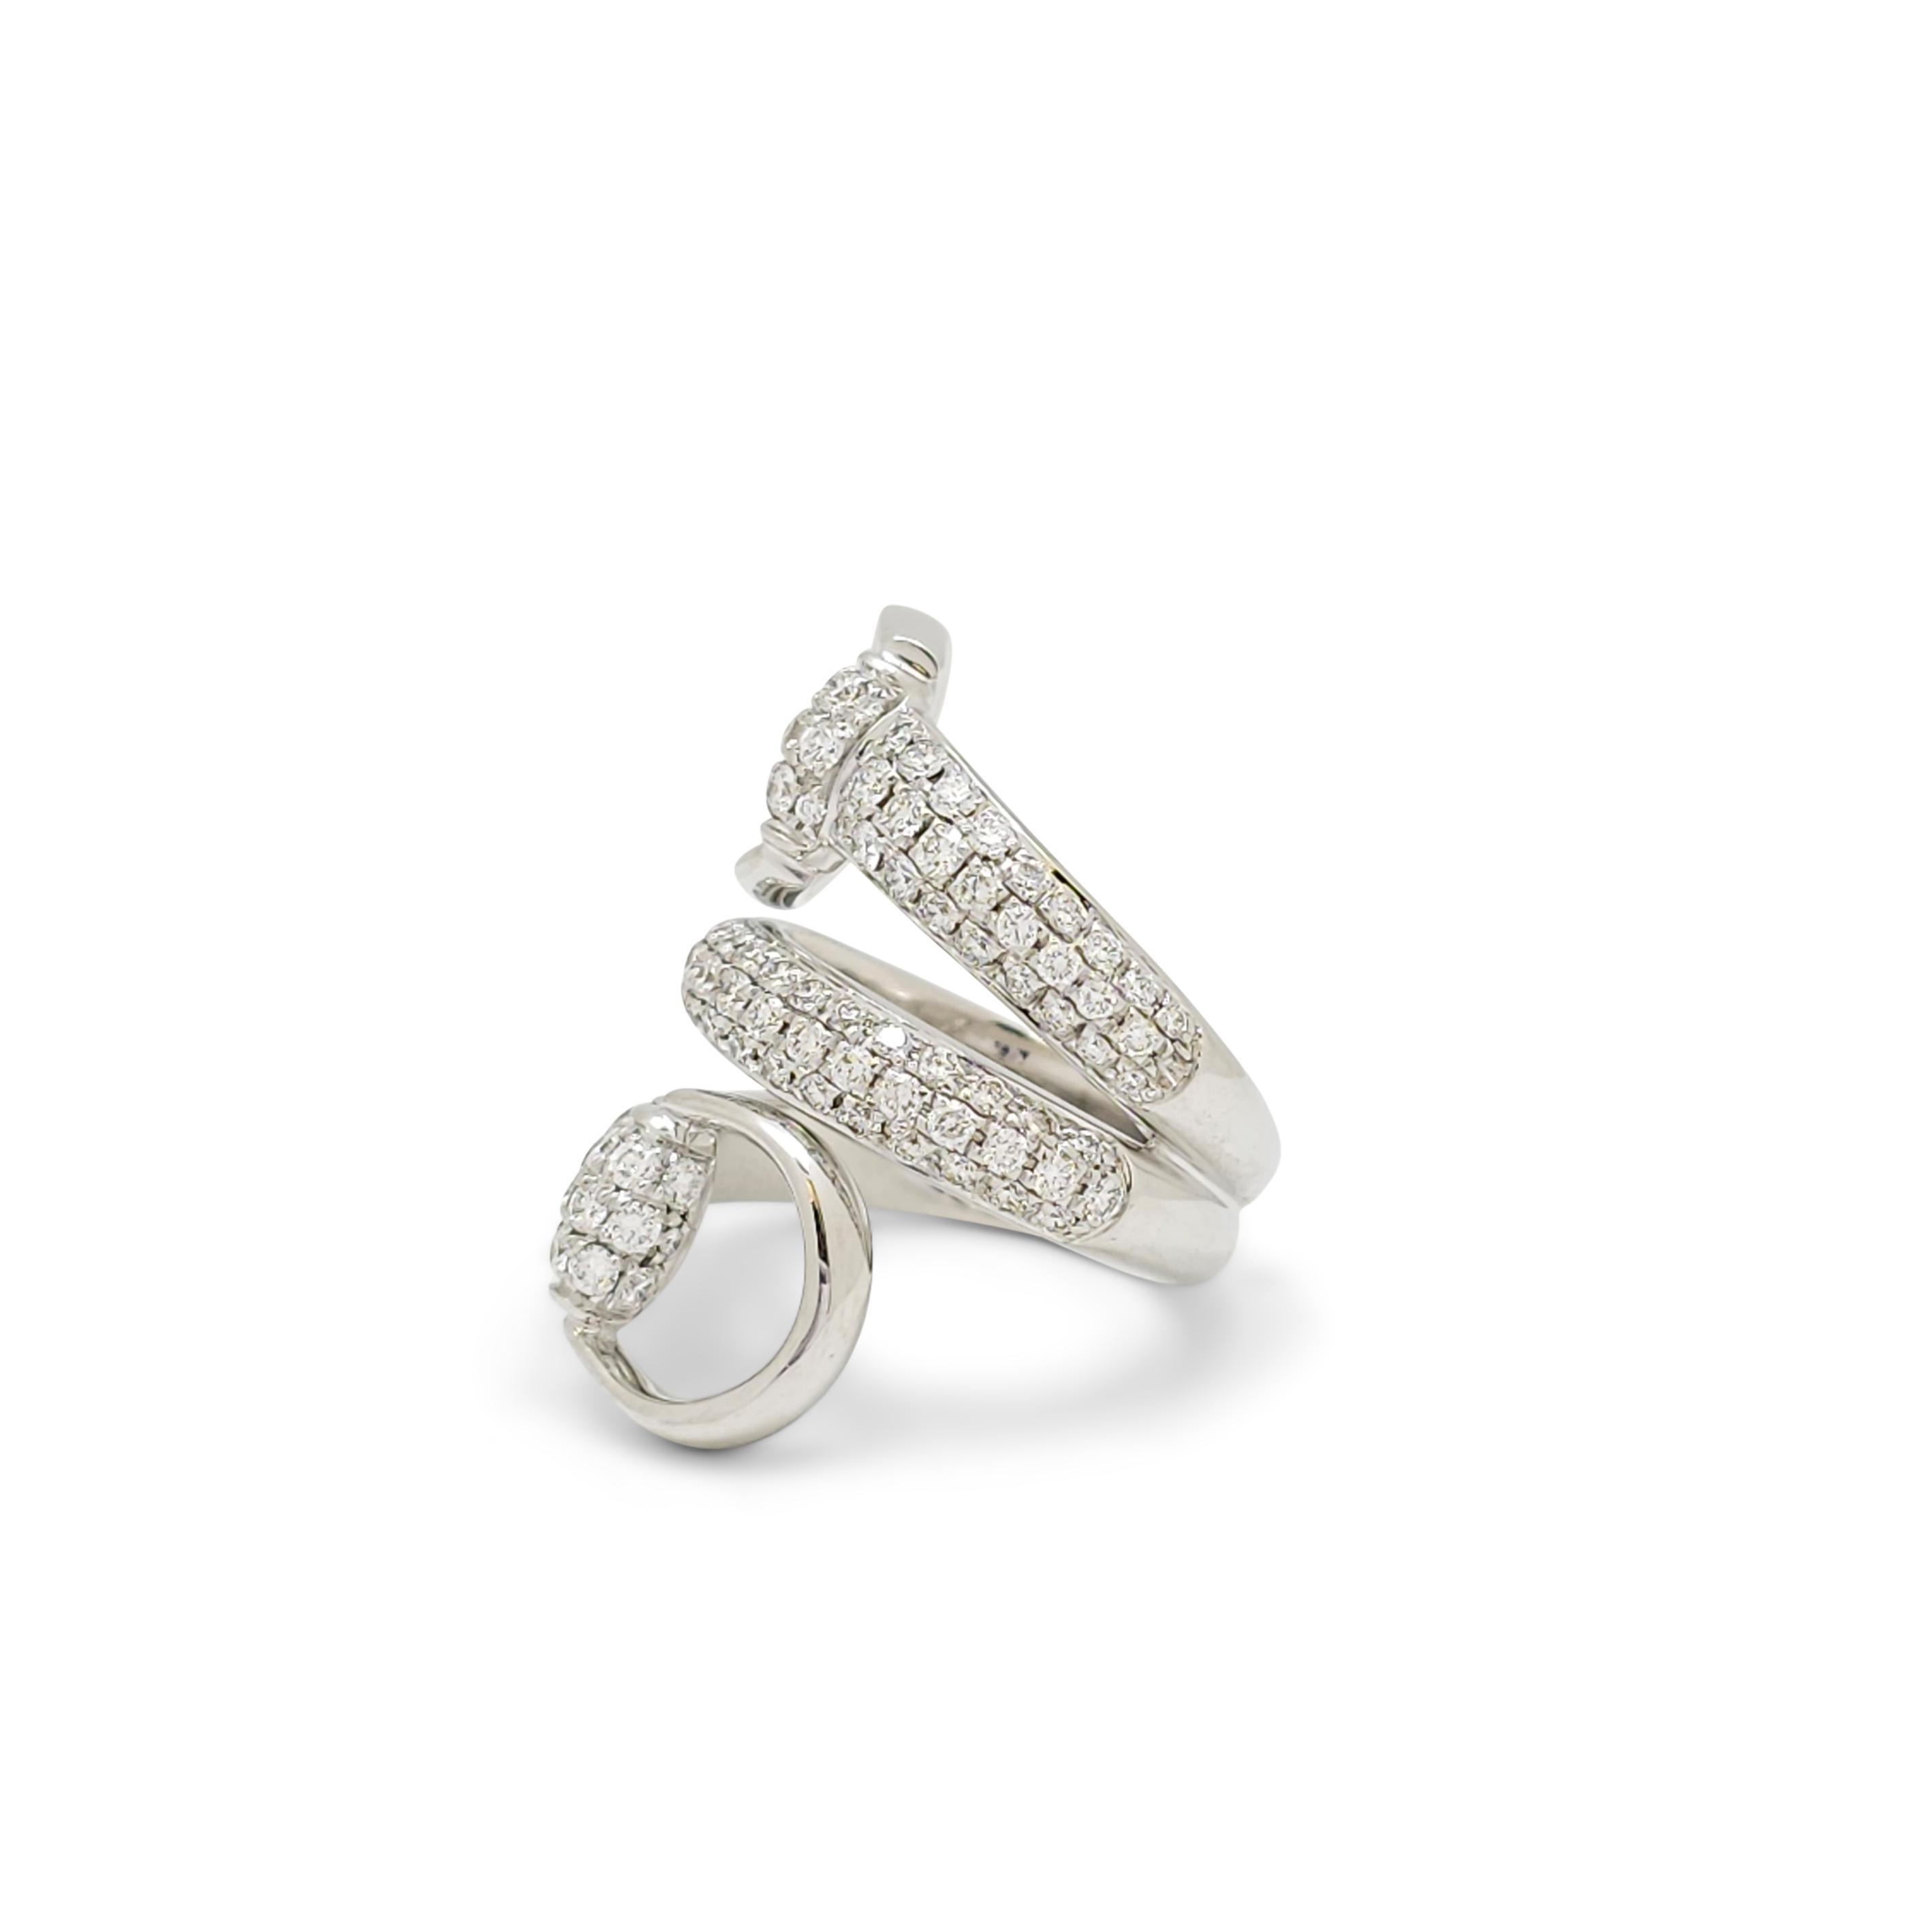 Authentic Gucci horsebit contraire ring crafted in 18 karat white gold.  The equestrian design wraps around the finger twice, displaying opposite ends of the horsebit at the top and bottom, and is set with approximately 1.95 carats of glittering